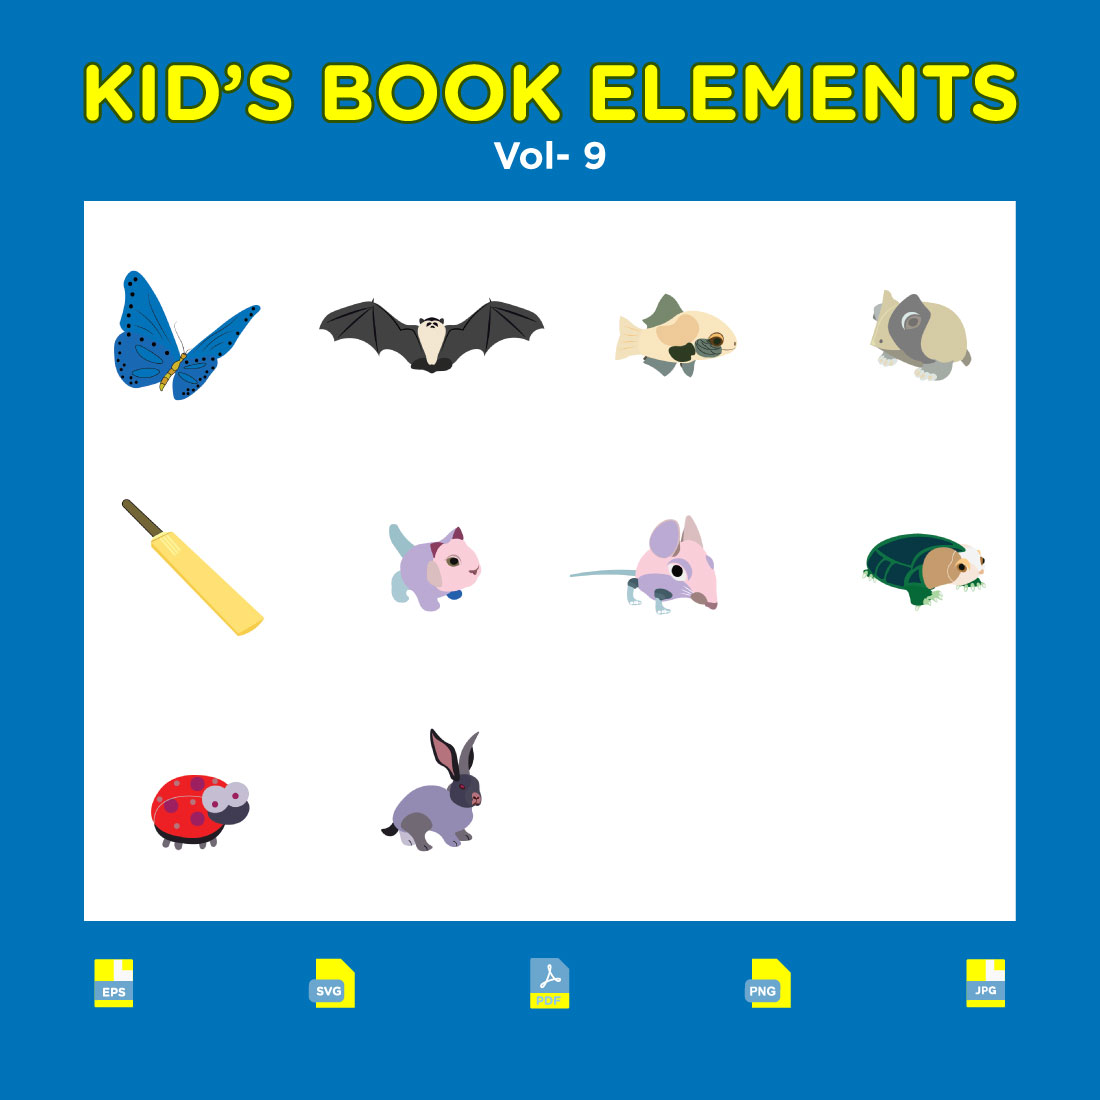 Kids Book Elements Vol-9 cover image.